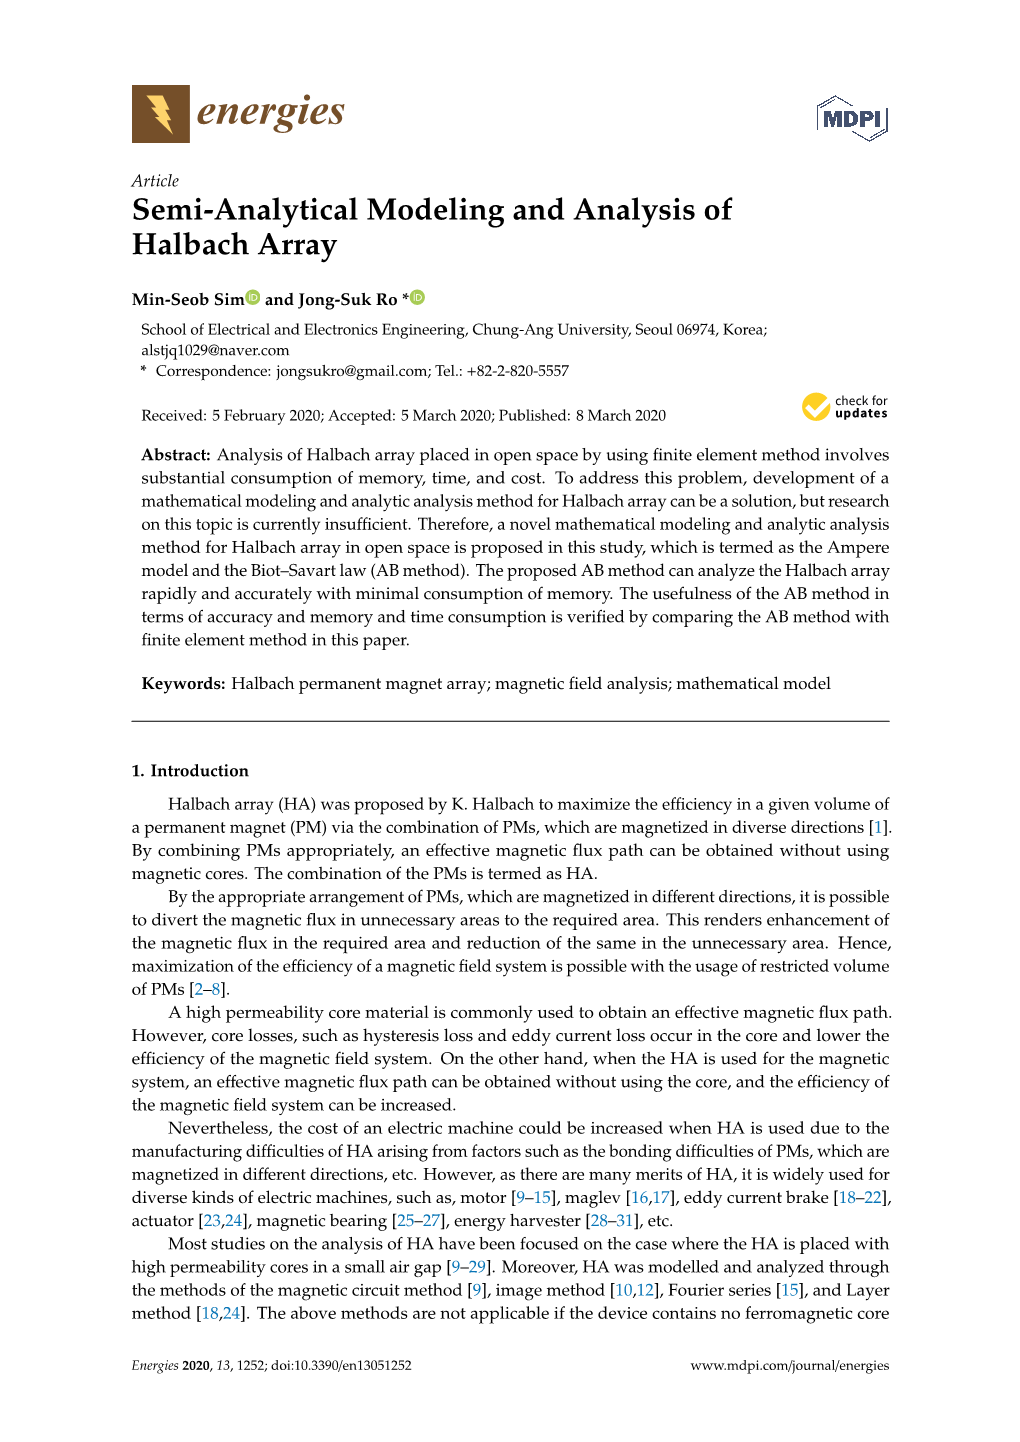 Semi-Analytical Modeling and Analysis of Halbach Array